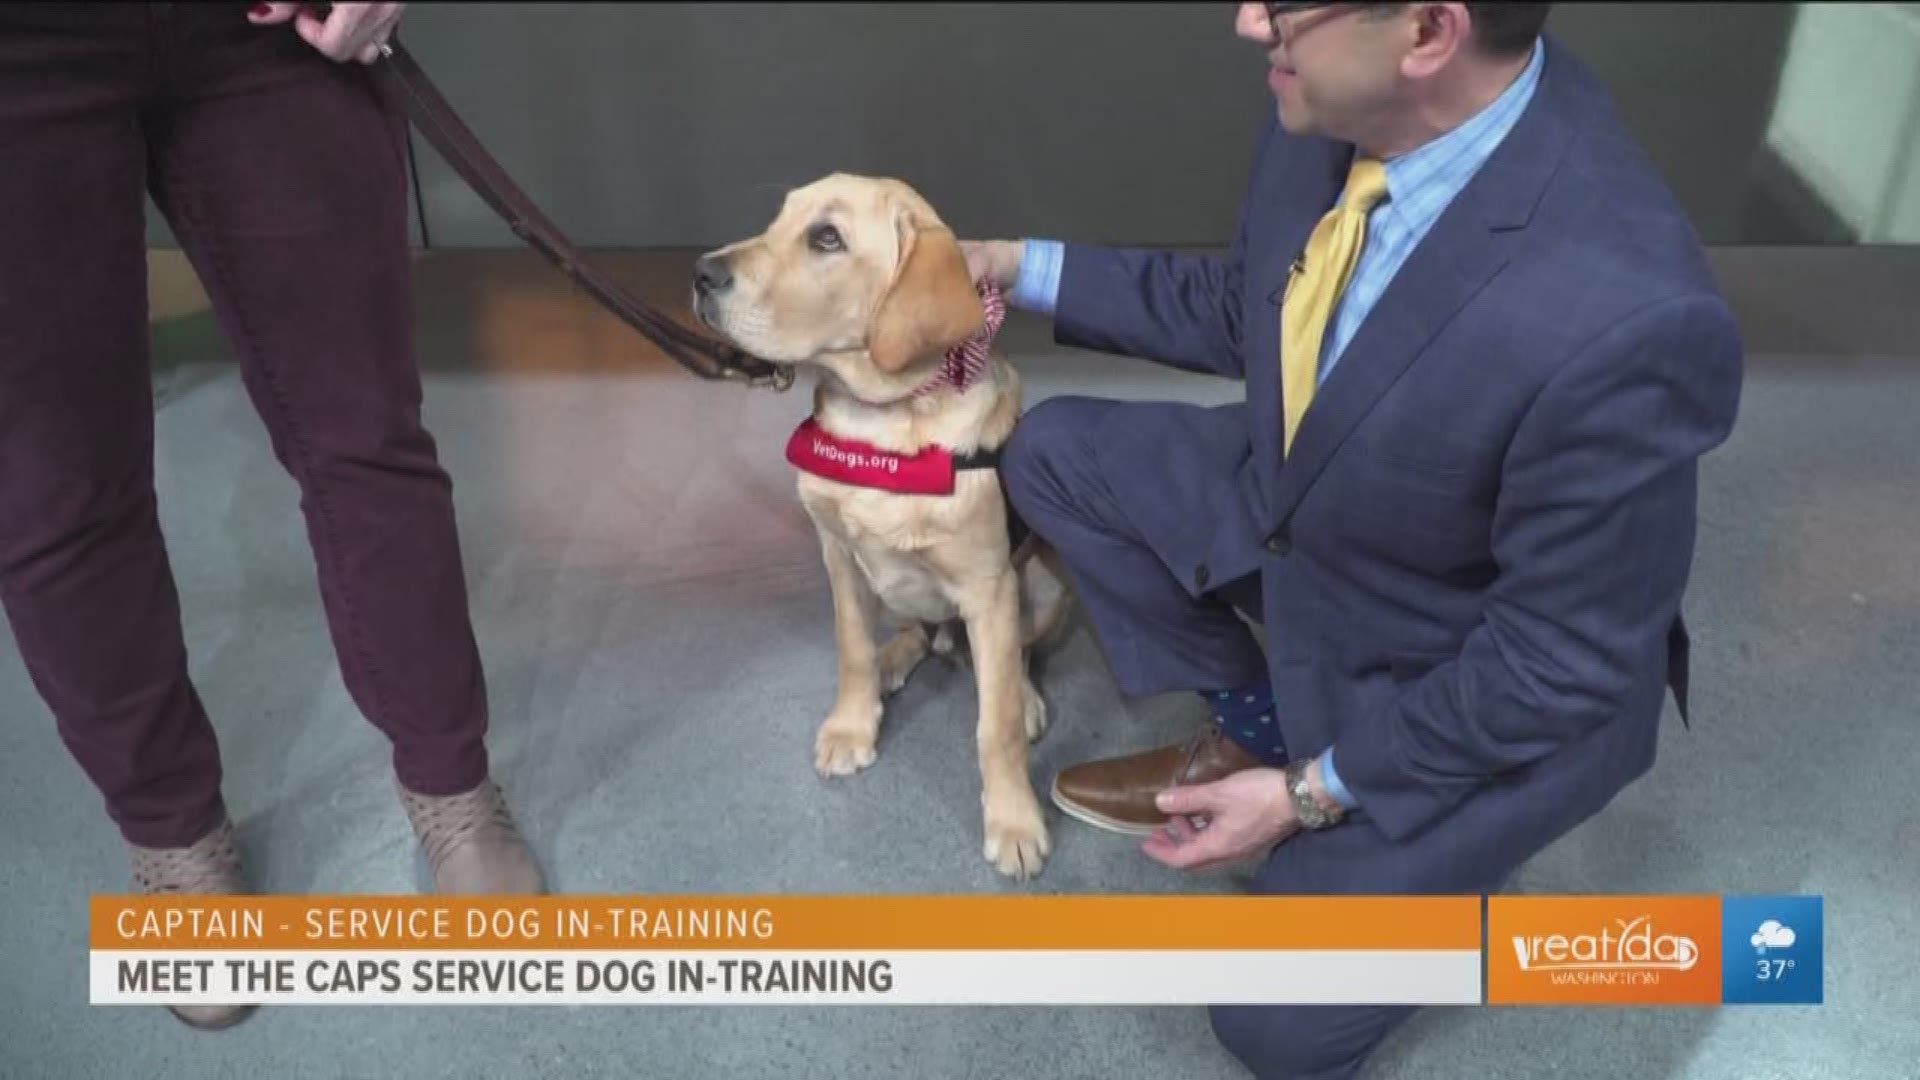 Captain, the Capitals service dog in-training joins Great Day with Captain's handler, Deana Stone of American's Vet Dogs.